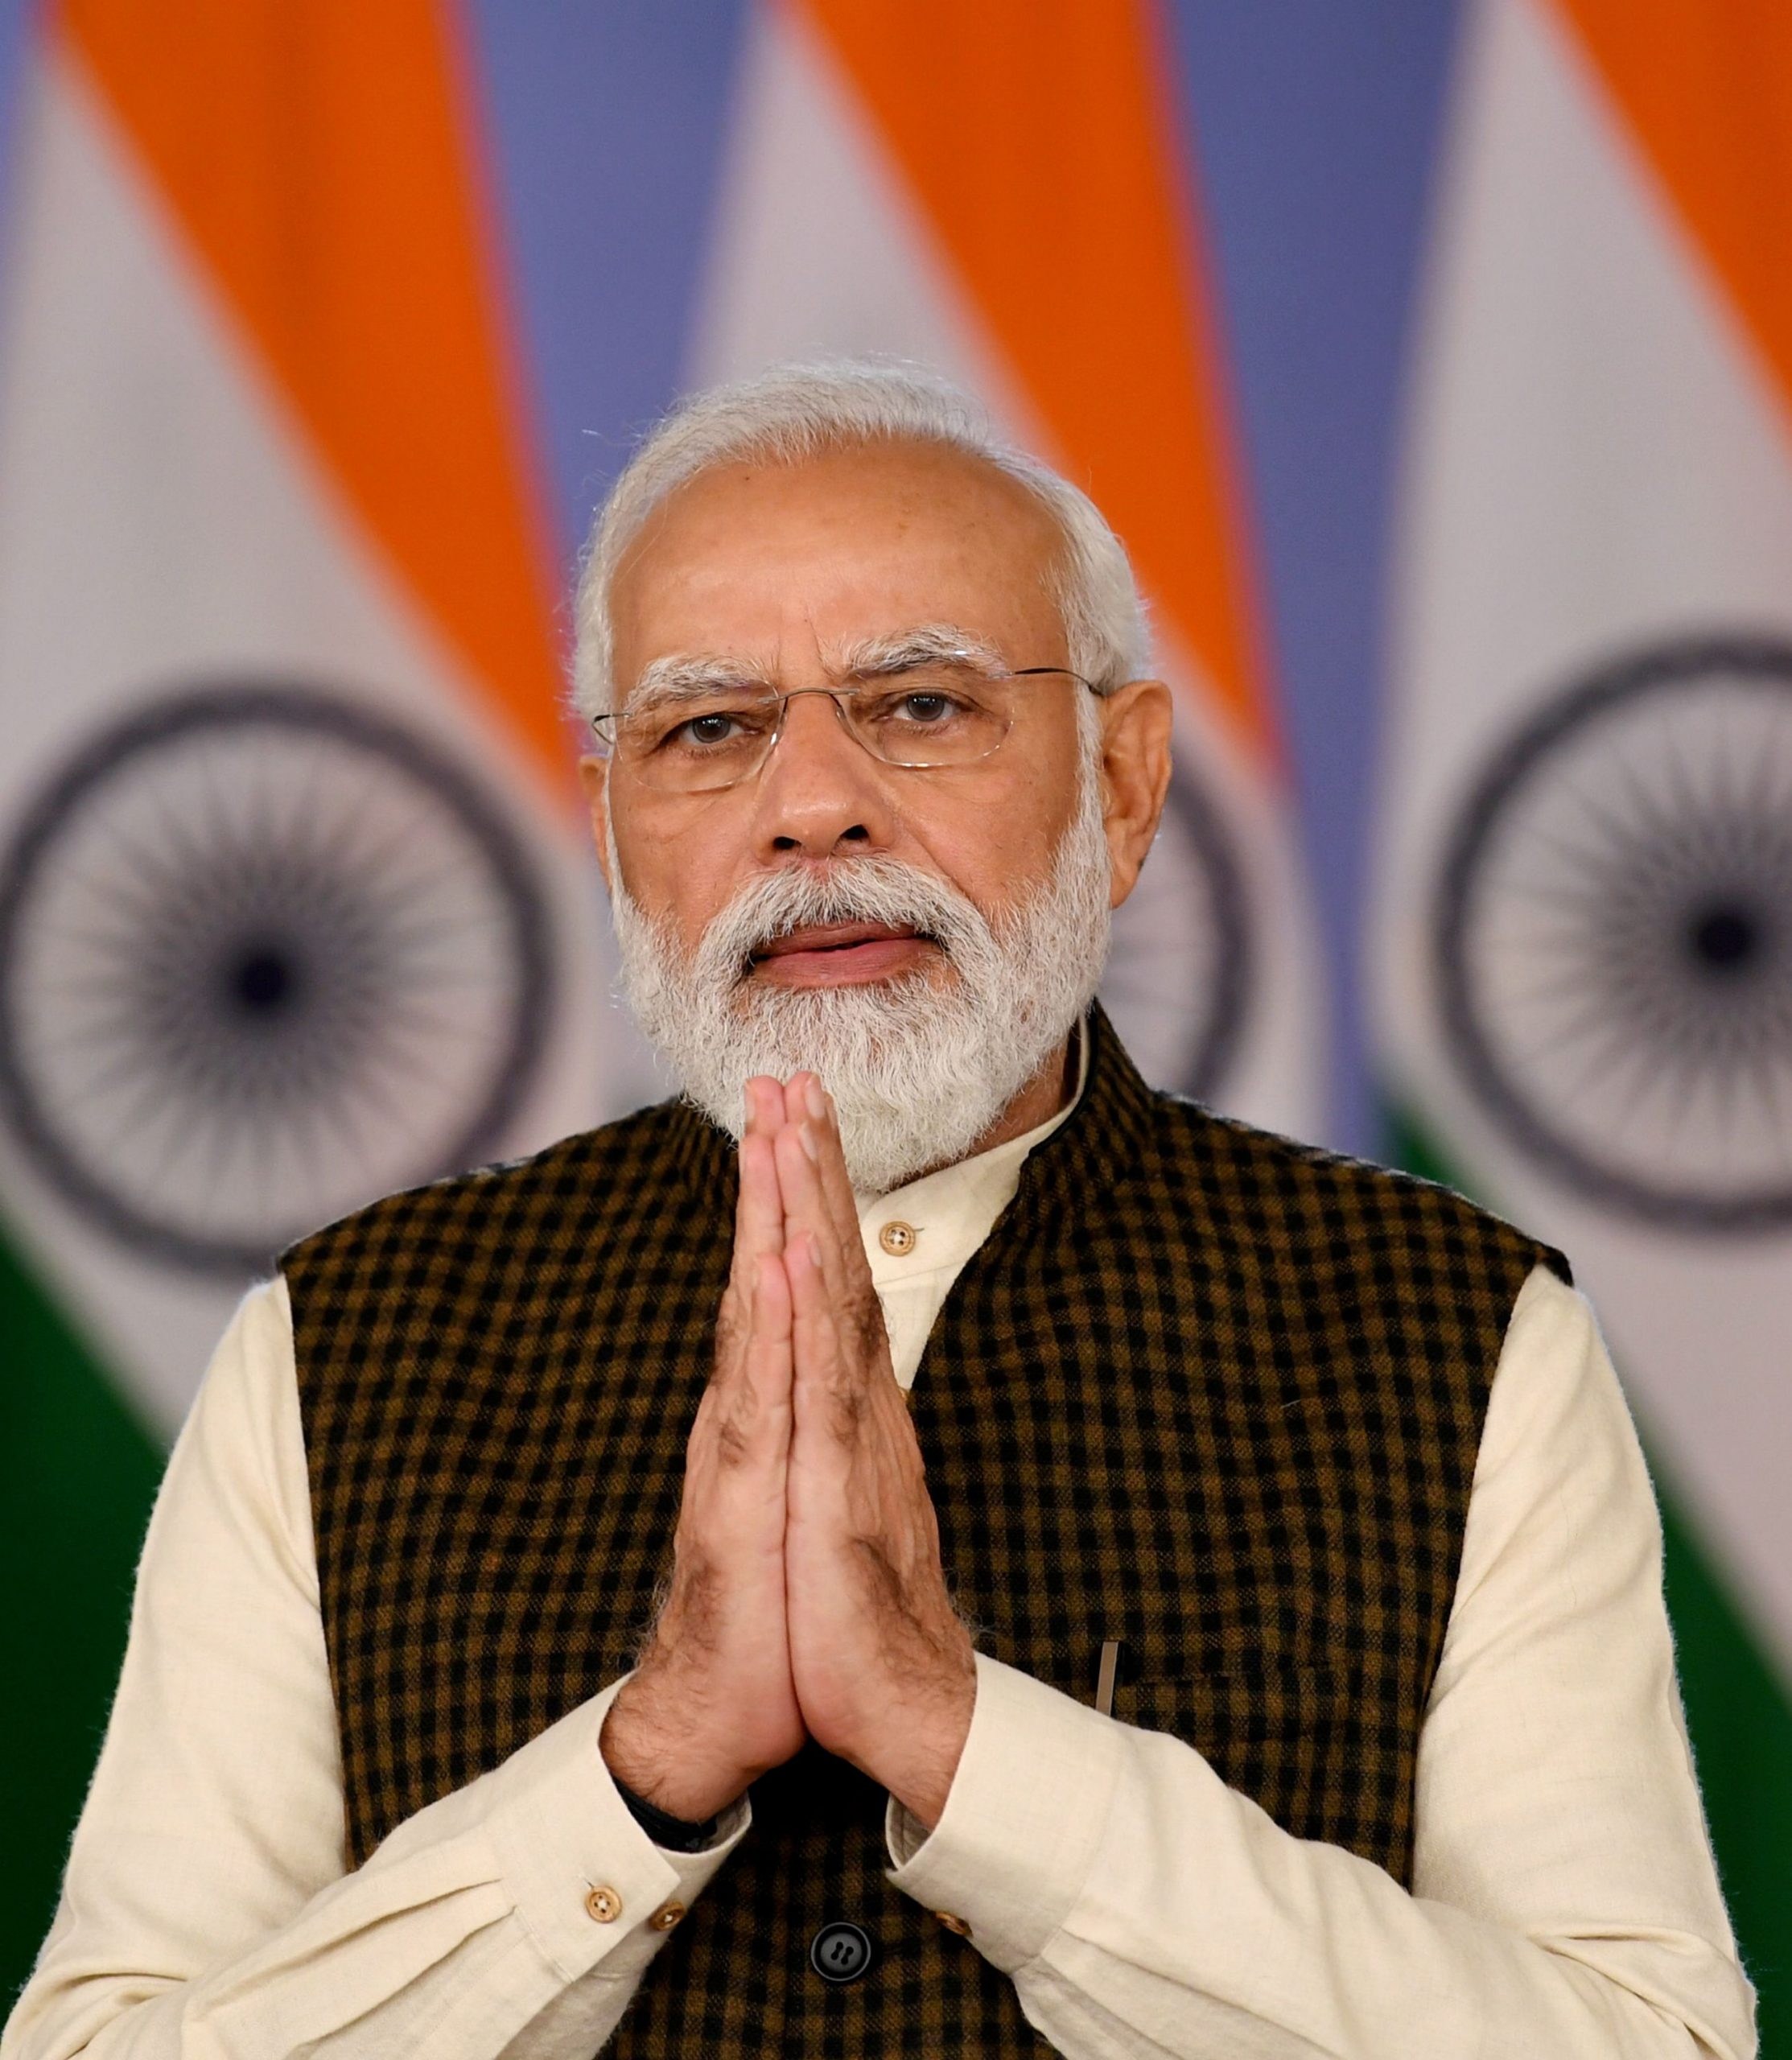 PM Modi’s Twitter handle was briefly compromised, matter escalated: PMO